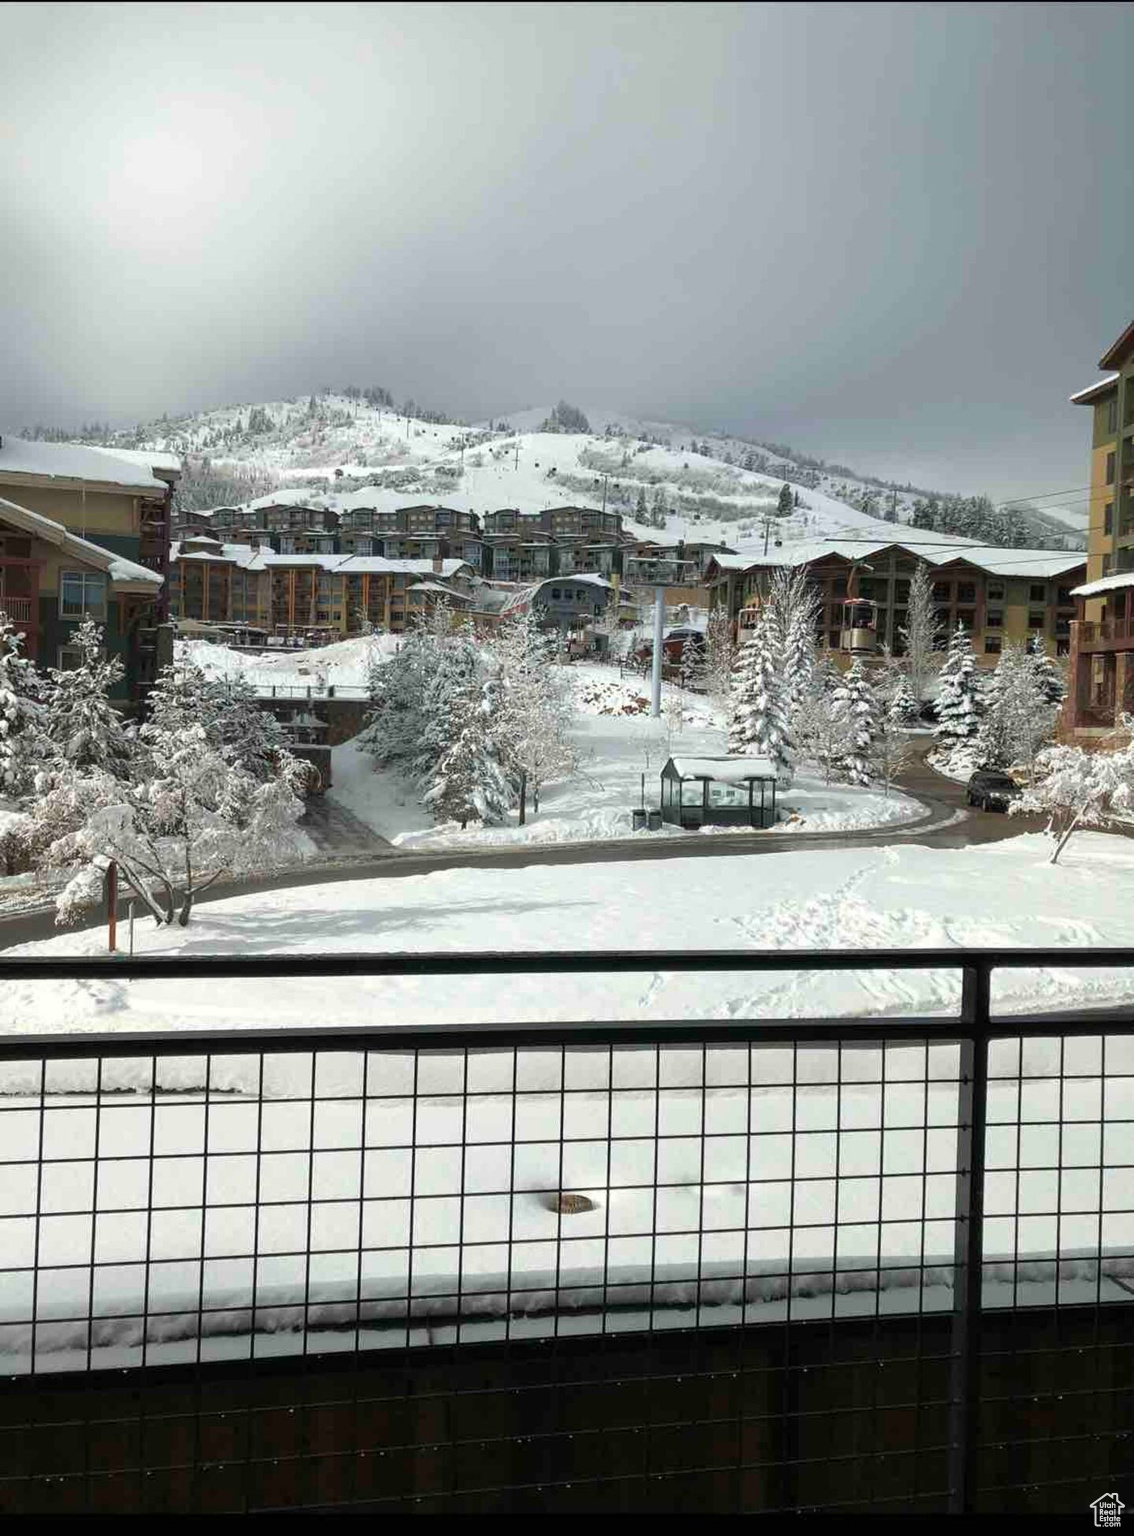 2670 W CANYONS RESORT #234, Park City, Utah 84098, 3 Rooms Rooms,Residential,For sale,CANYONS RESORT,1975707